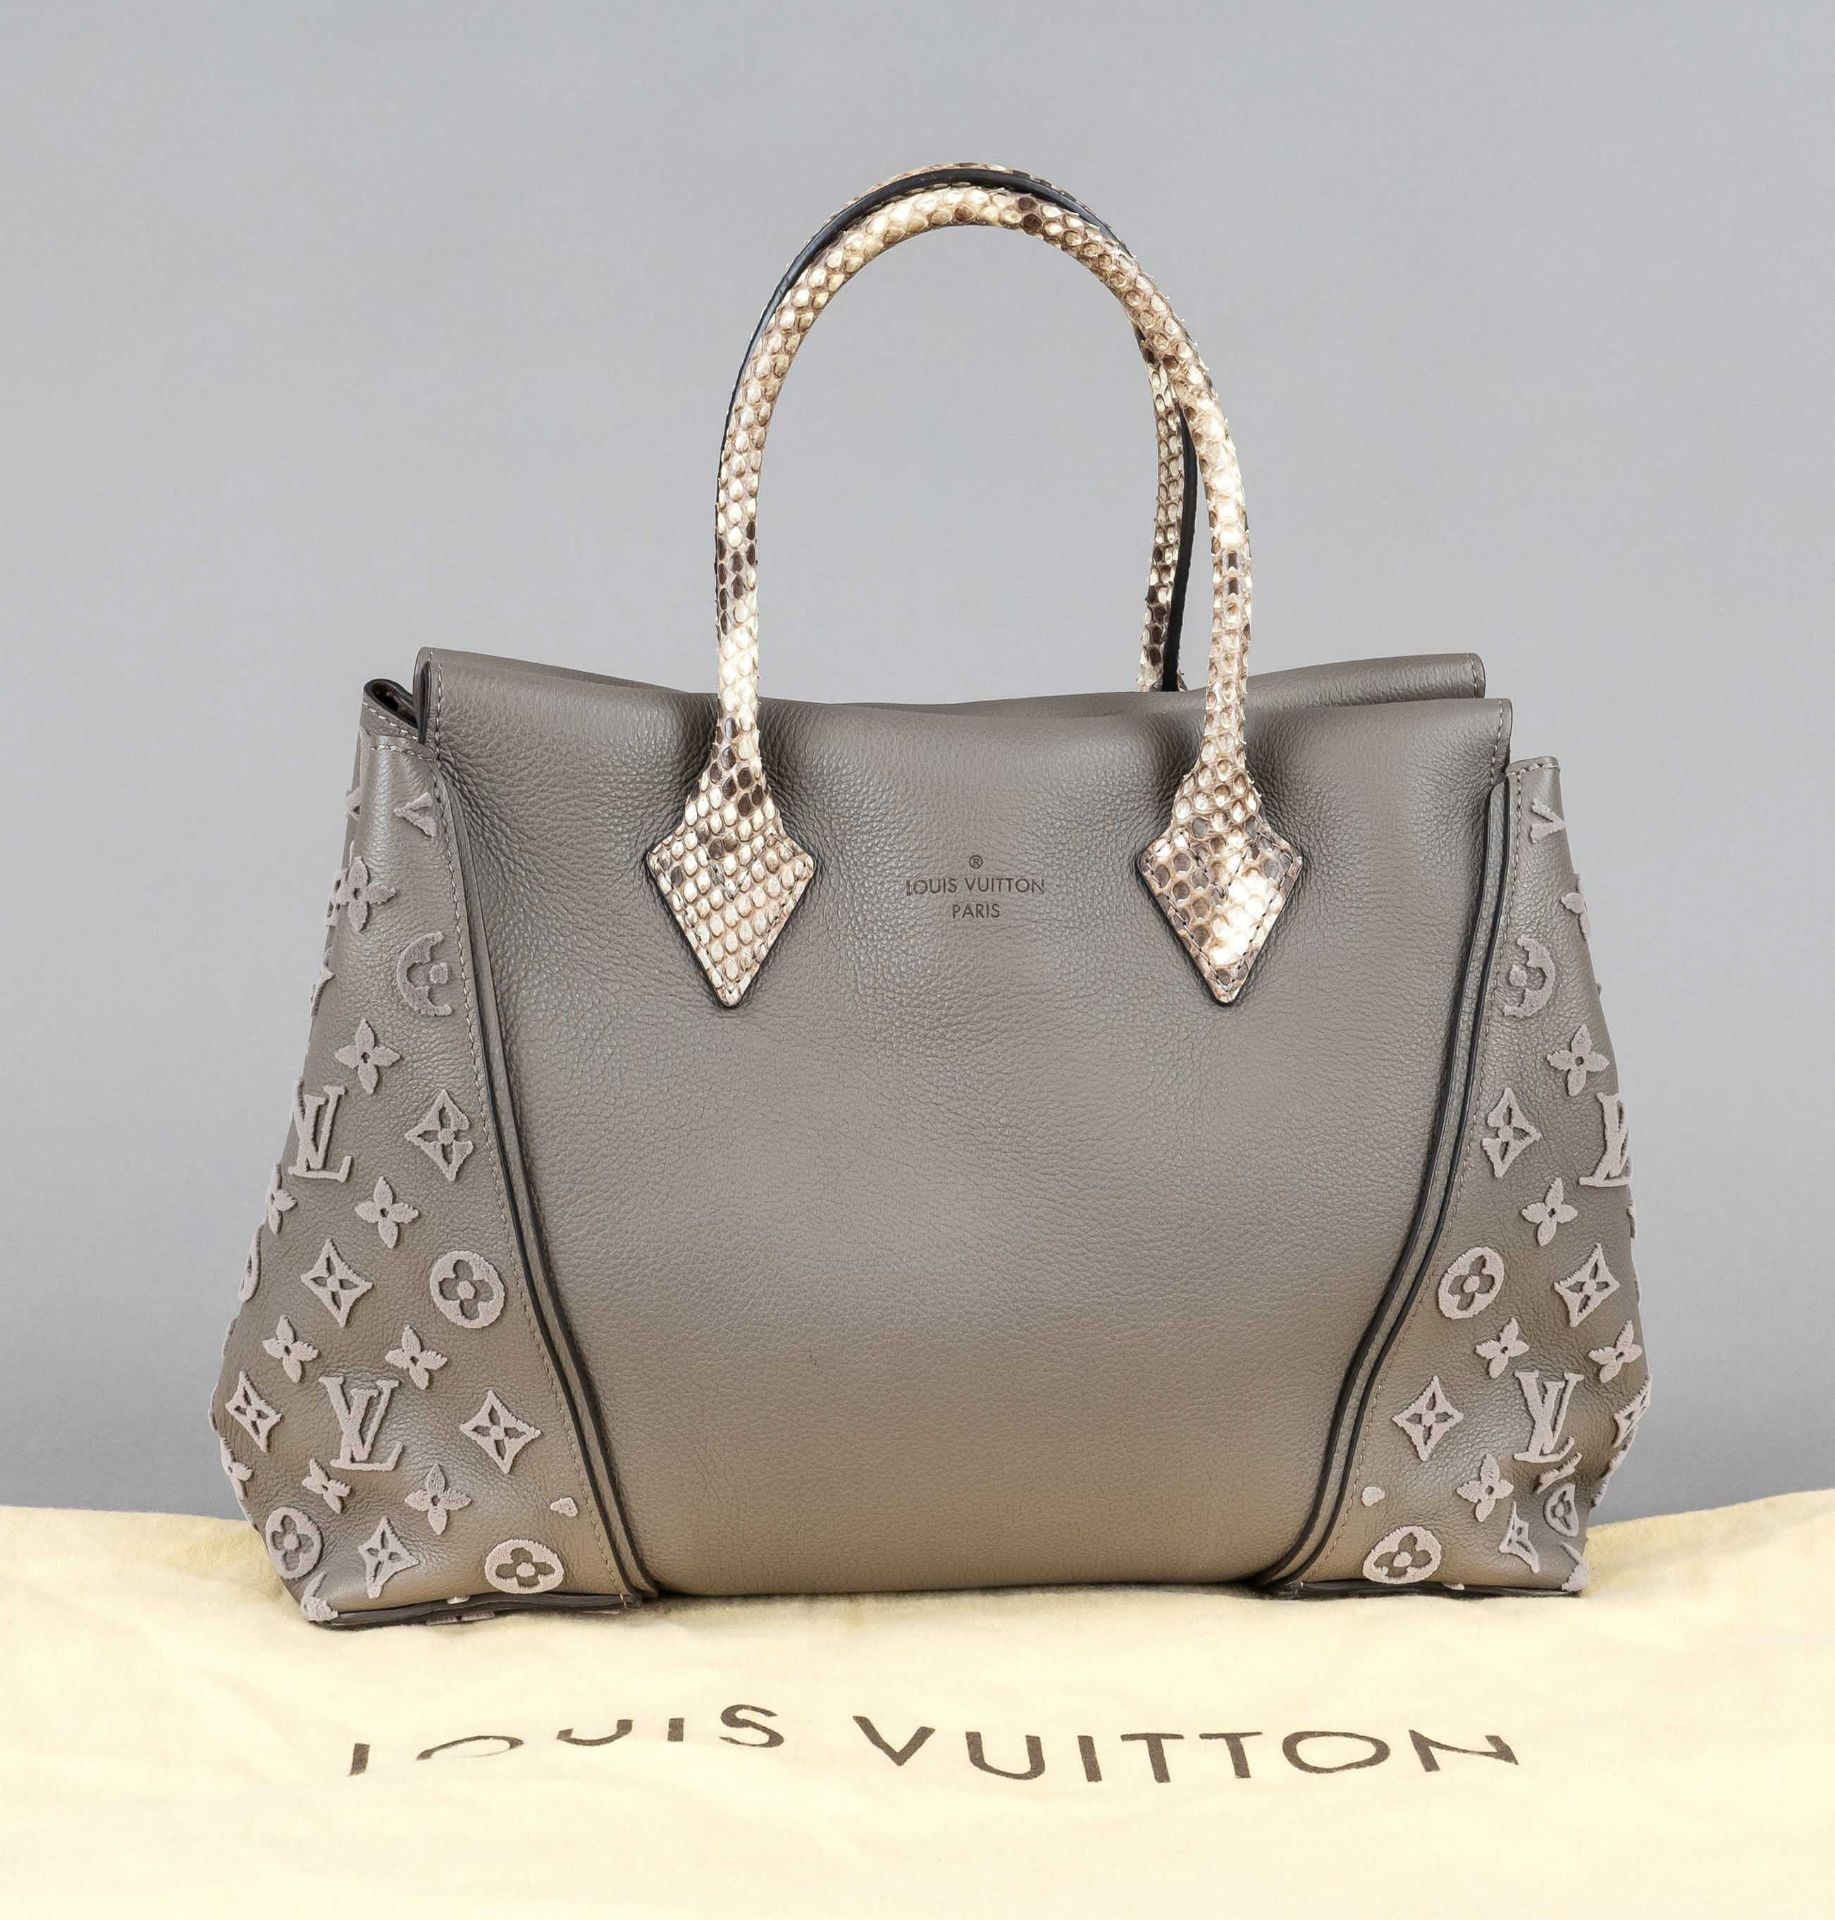 Louis Vuitton, Galet Beige Flocked Monogram Velvet and Veau Cachemire Leather W PM Tote Bag, taupe